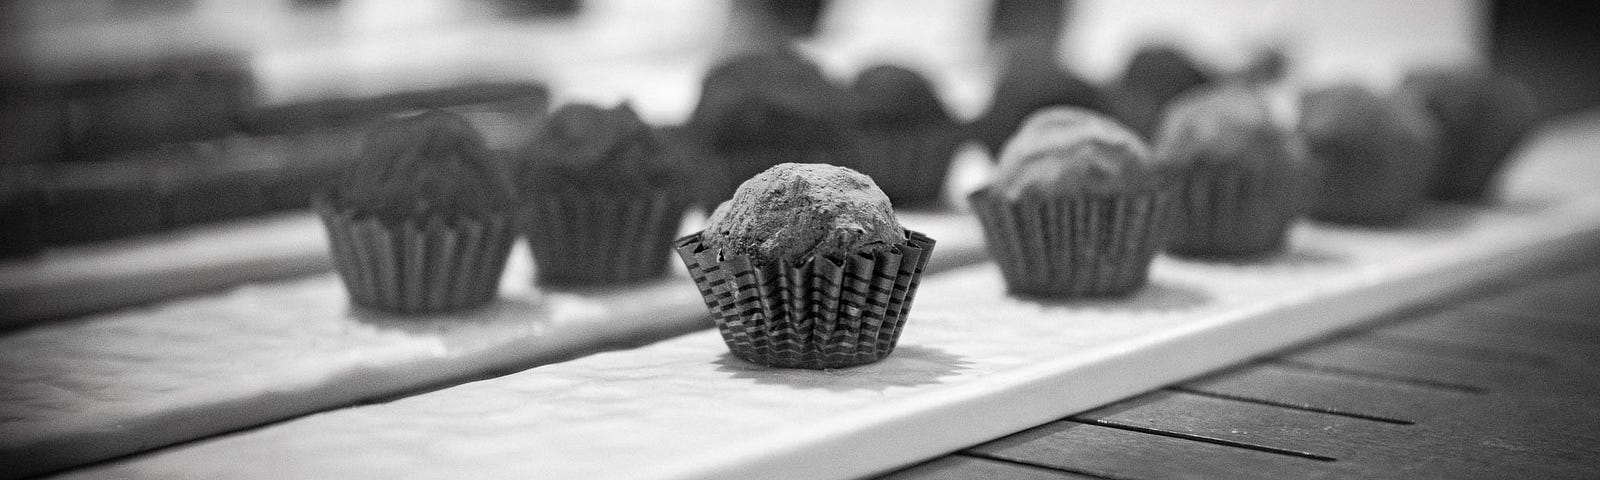 Black and white photo of a matcha-dusted creamy chocolate bonbons from Fous-Desserts.